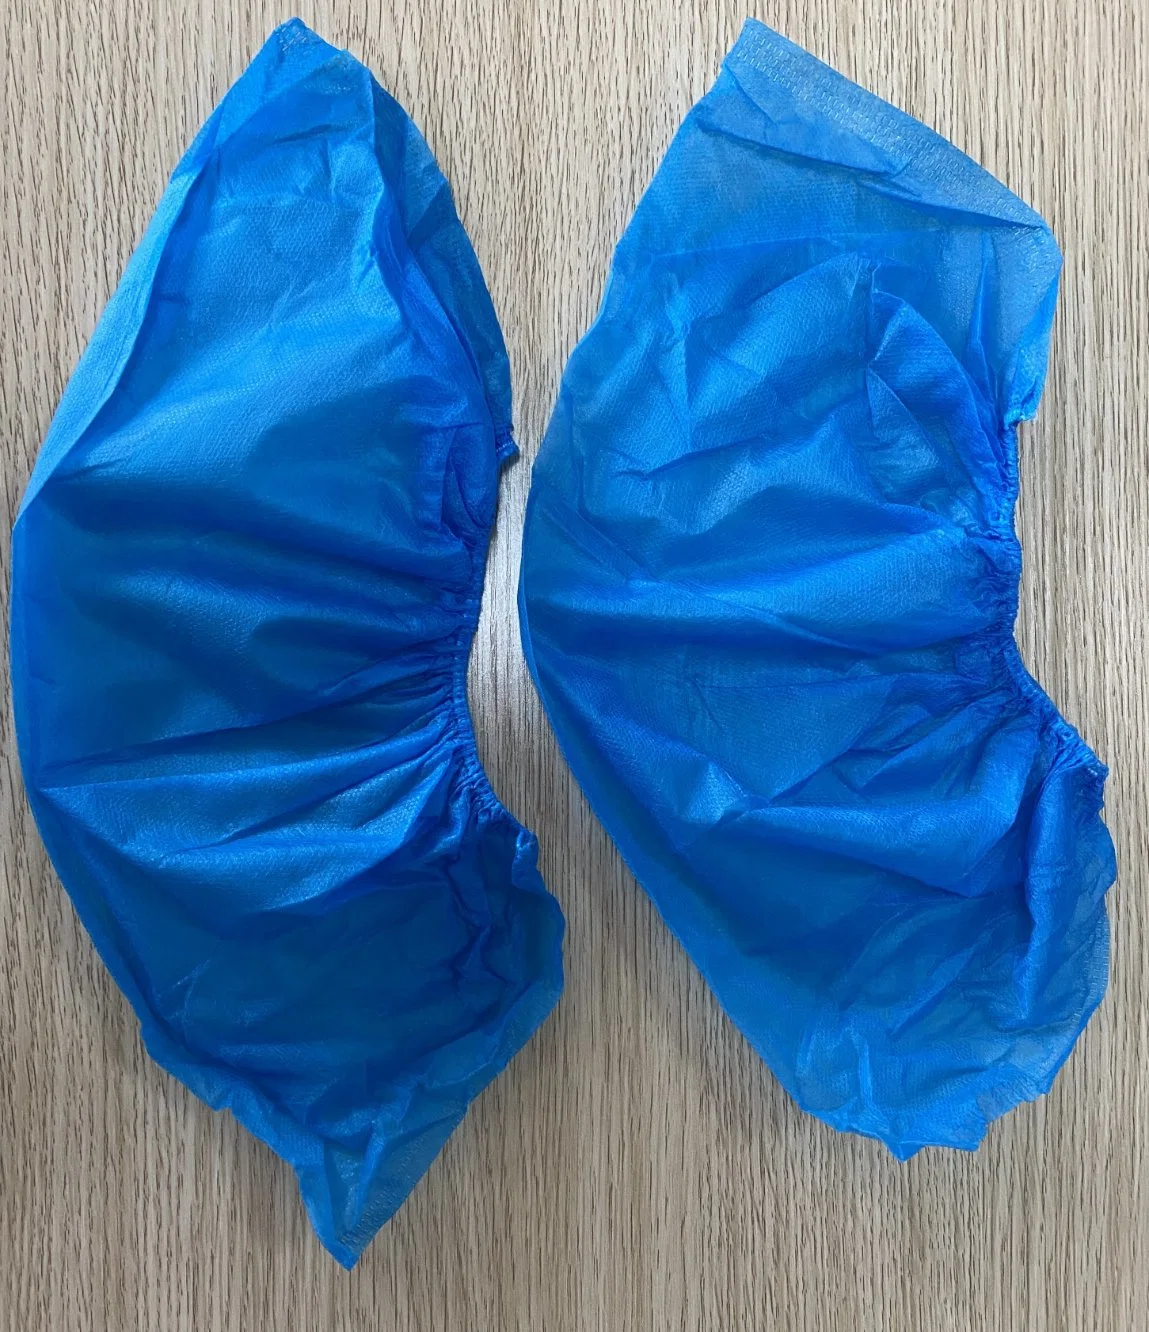 Overshoes Disposable PP SMS CE/ISO Approved Nonwoven 10-30GSM Shoe Cover Anti Slip Shoe Cover